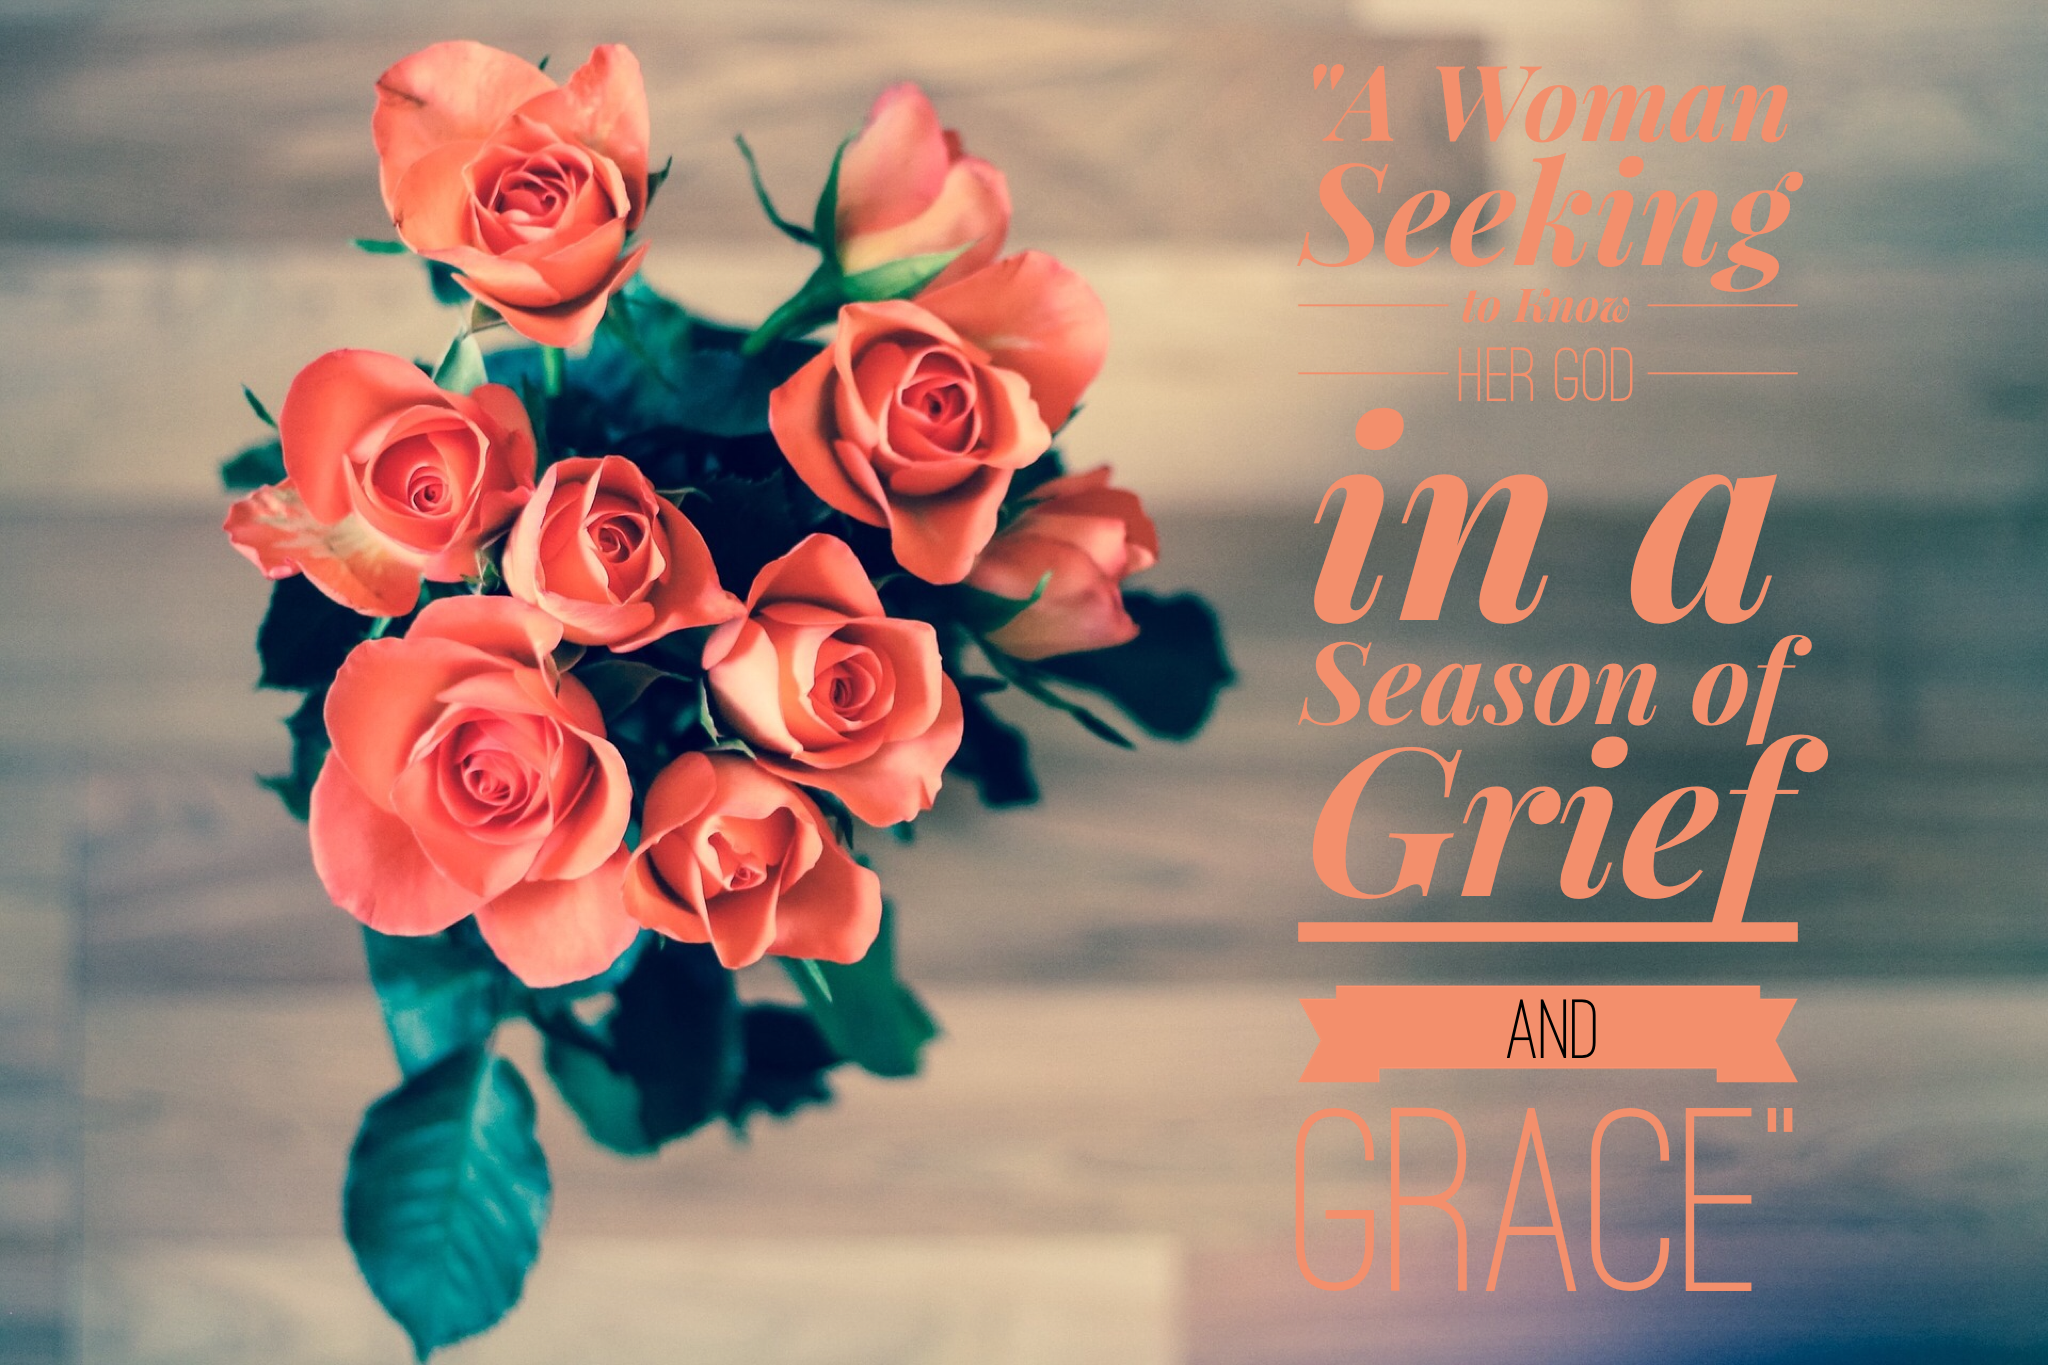 A Woman Seeking to Know Her God in a Season of Grief and Grace | www.codyandras.com/blog/2017/9/17/a-woman-trying-to-know-god-in-a-season-of-grief-and-grace